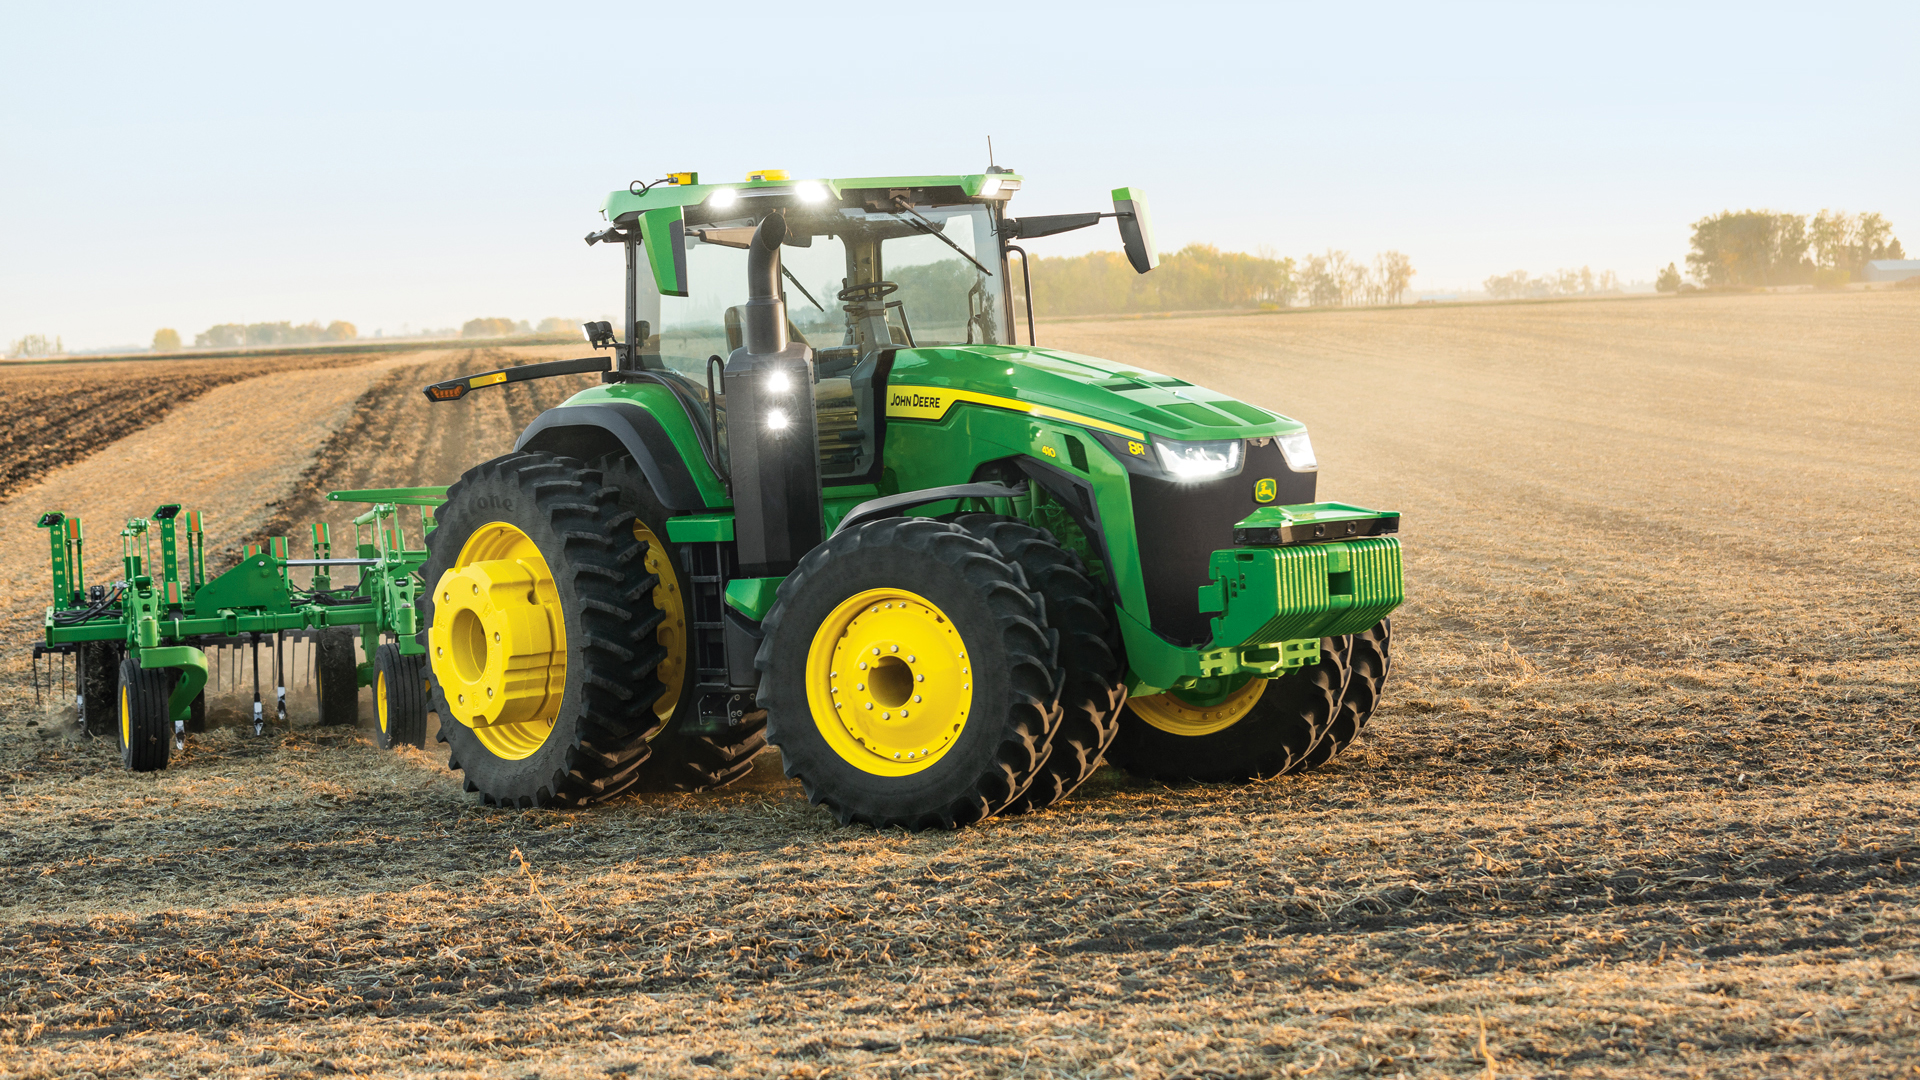 John Deere unveiled the fully autonomous tractor in Las Vegas on Tuesday at the tech event CES 2022